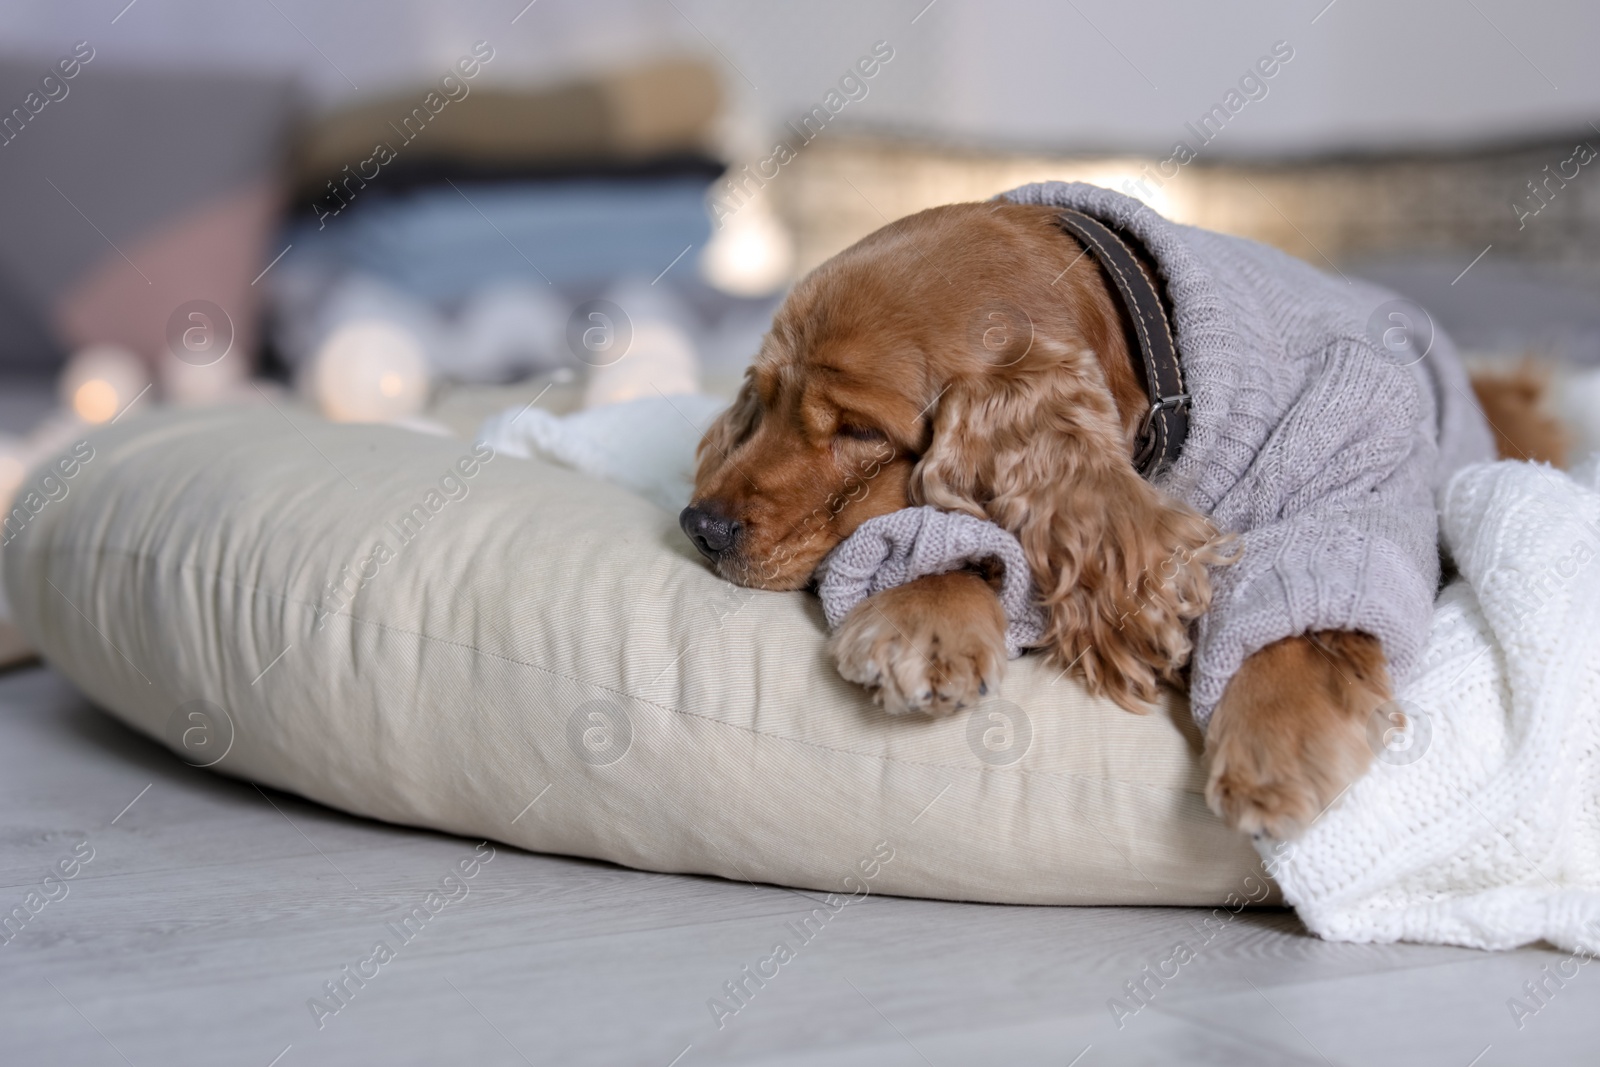 Photo of Cute Cocker Spaniel dog in knitted sweater lying on pillow at home. Warm and cozy winter